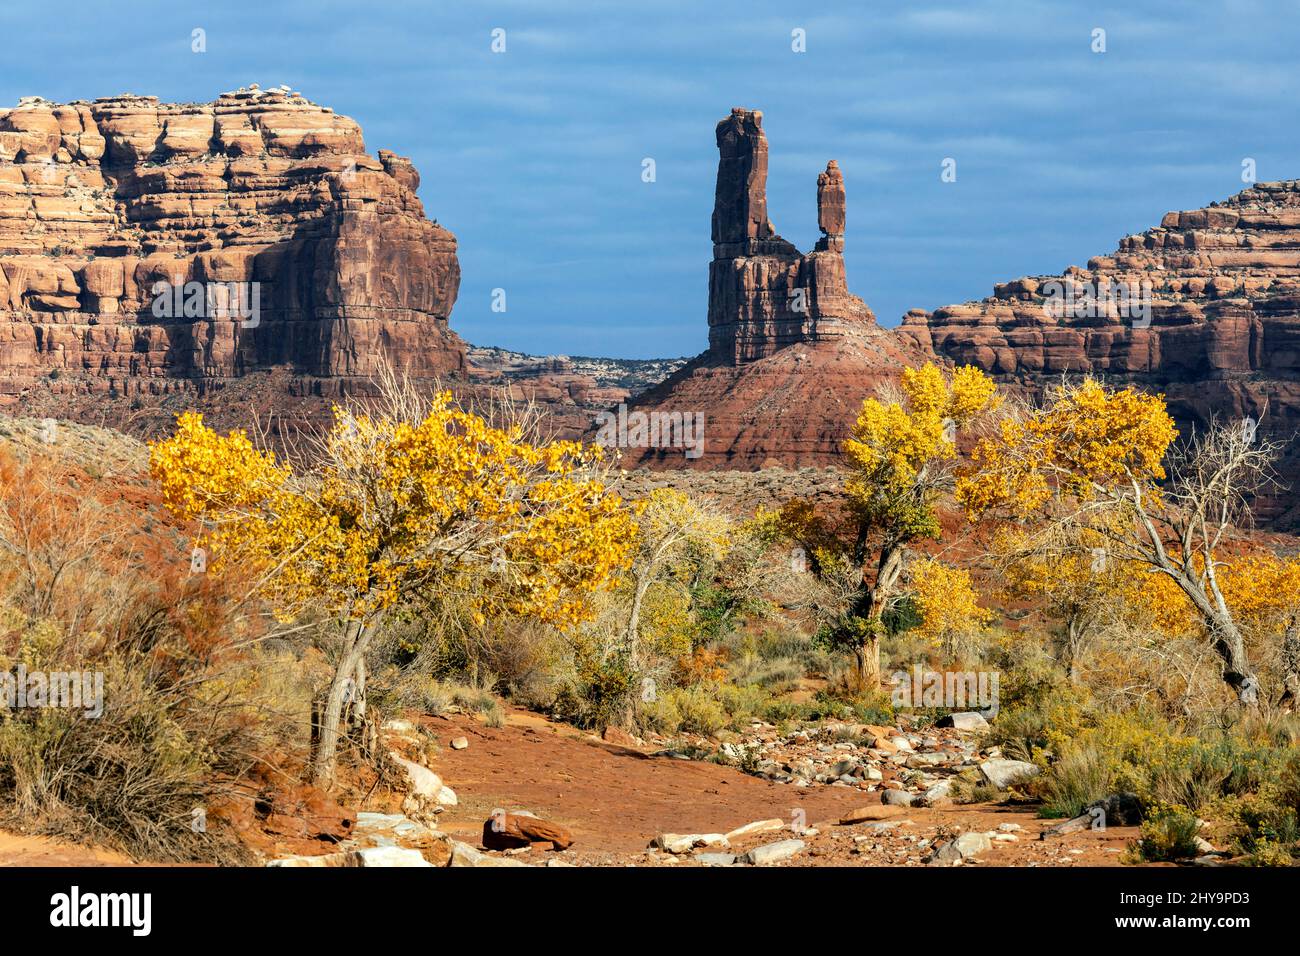 UT00912-00.....UTAH - Cottonwood trees and formation called De Gaulle and his tropops in the Valley Of The Gods, Bears Ears National Monument. Stock Photo